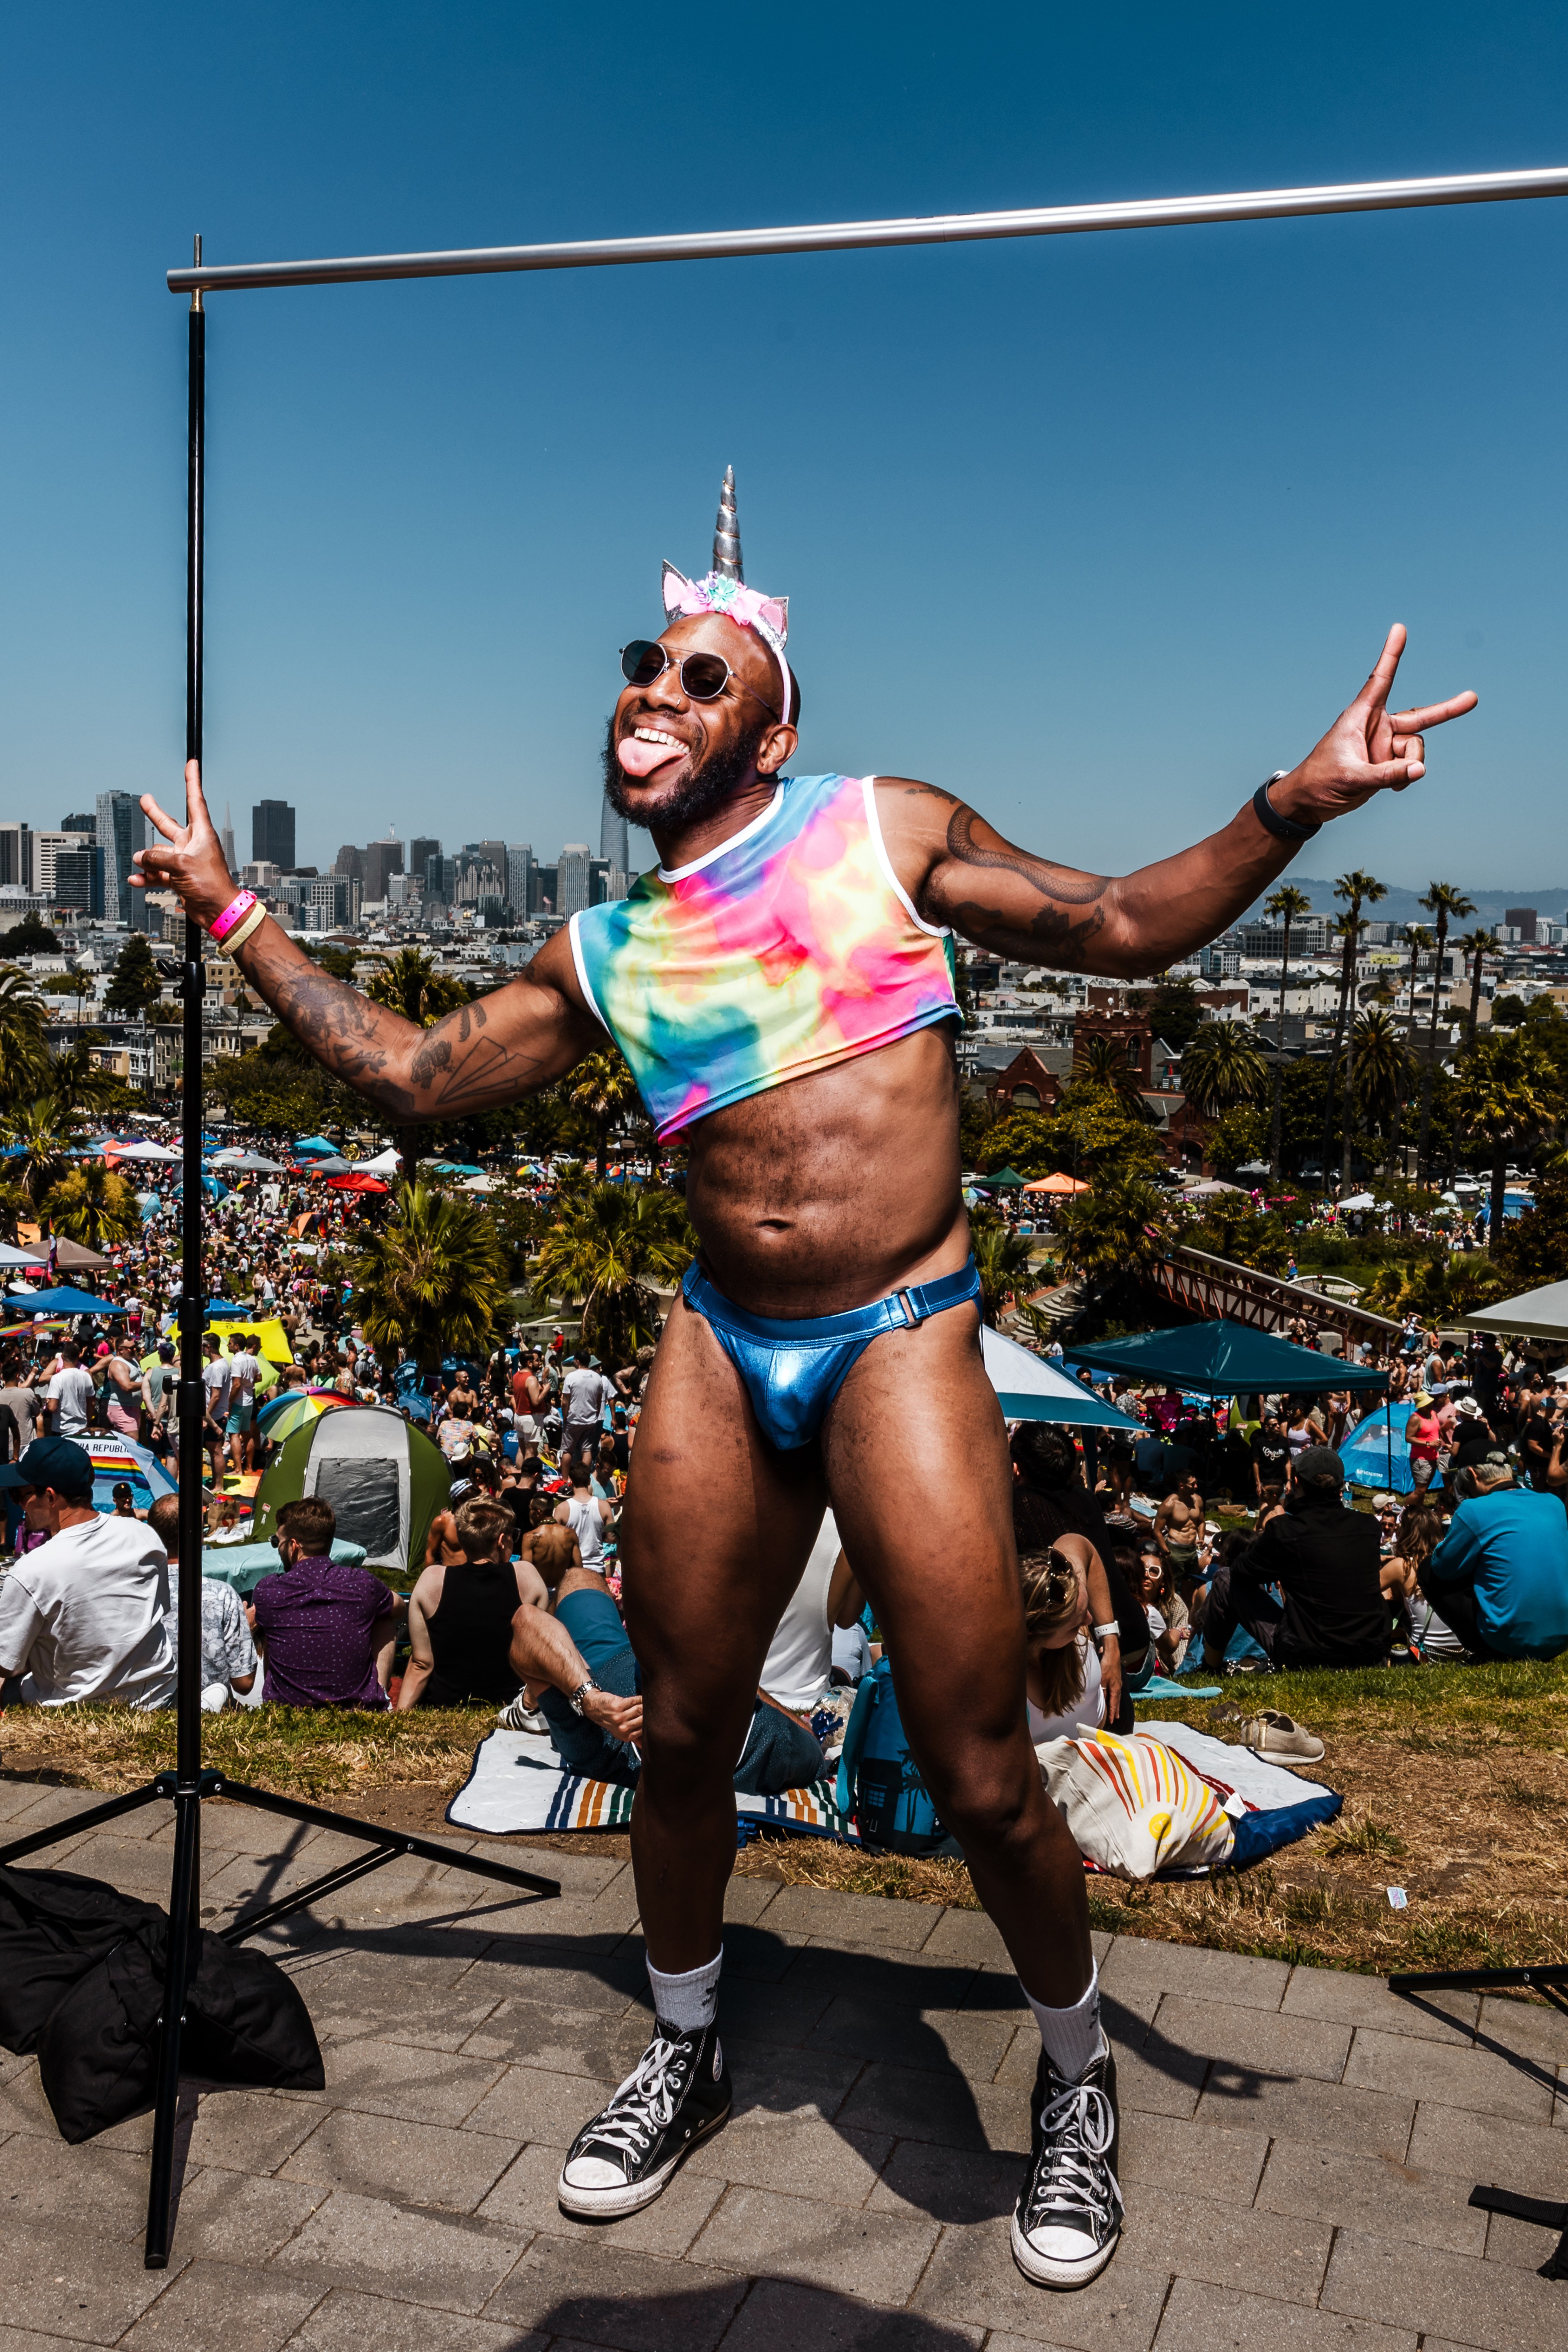 A person dressed in a rainbow crop top, blue briefs, and a unicorn headband with a horn poses joyfully, making a peace sign. They are in a park crowded with people.